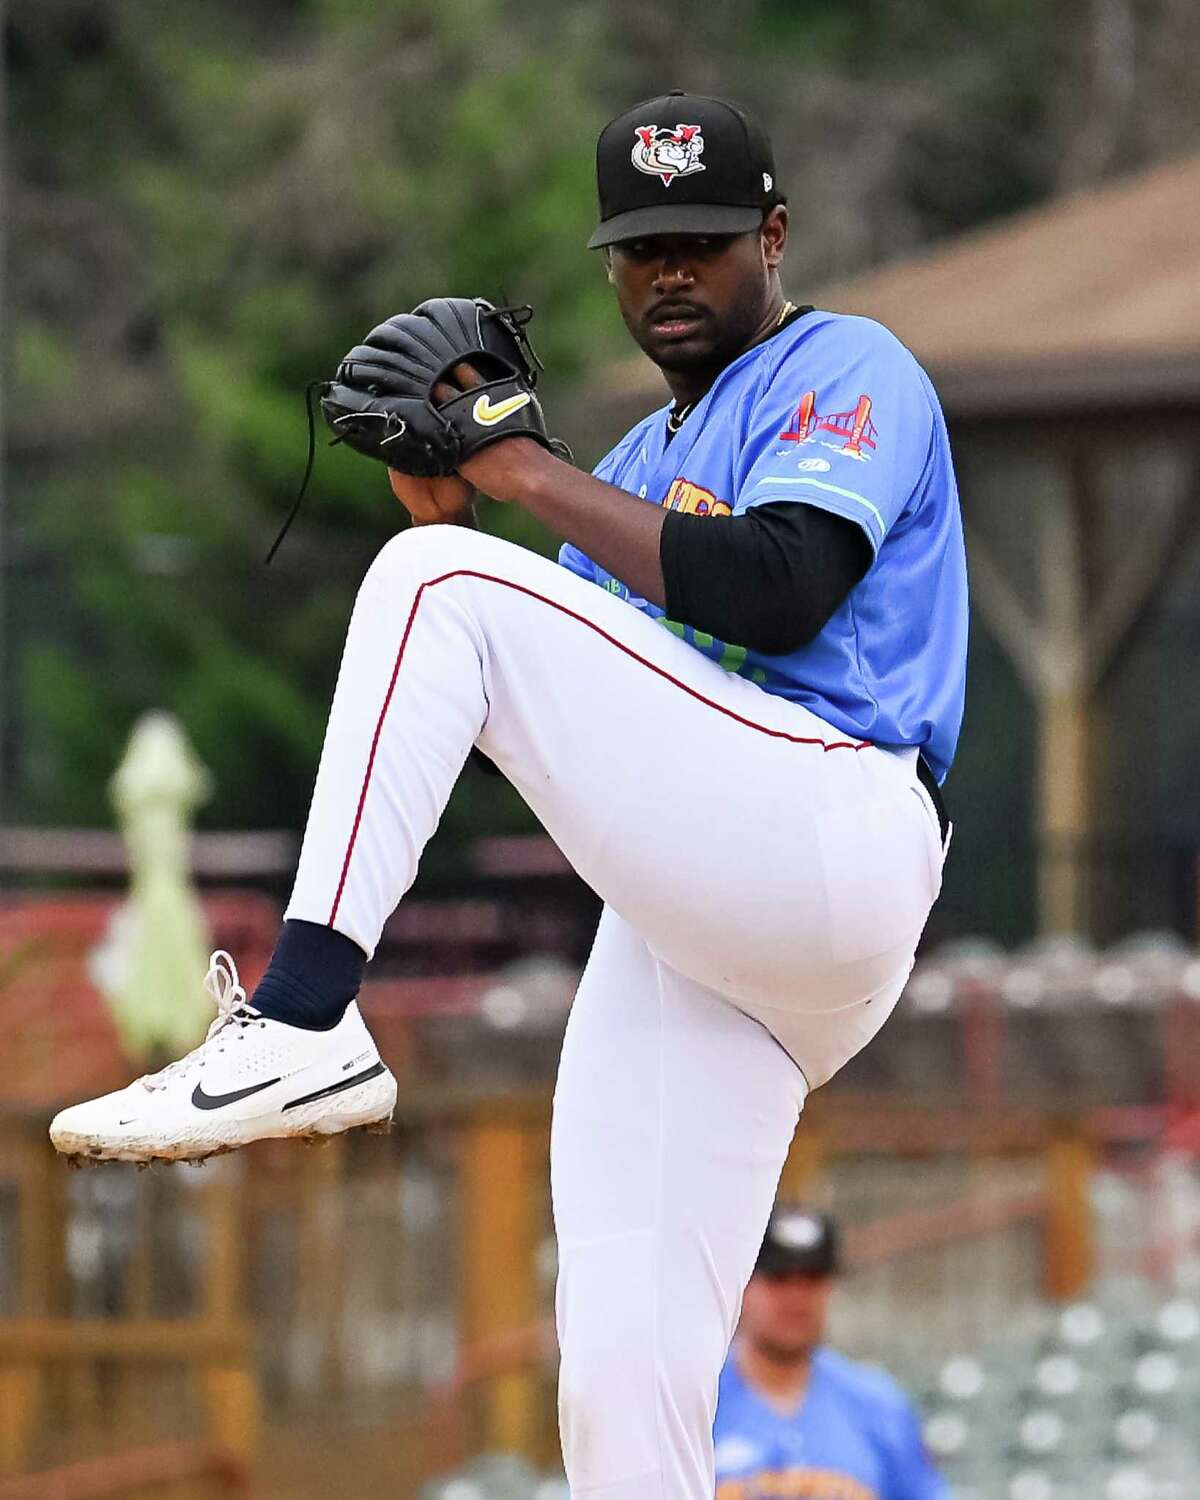 Kumar Rocker, former ValleyCat, drafted third overall by Texas Rangers